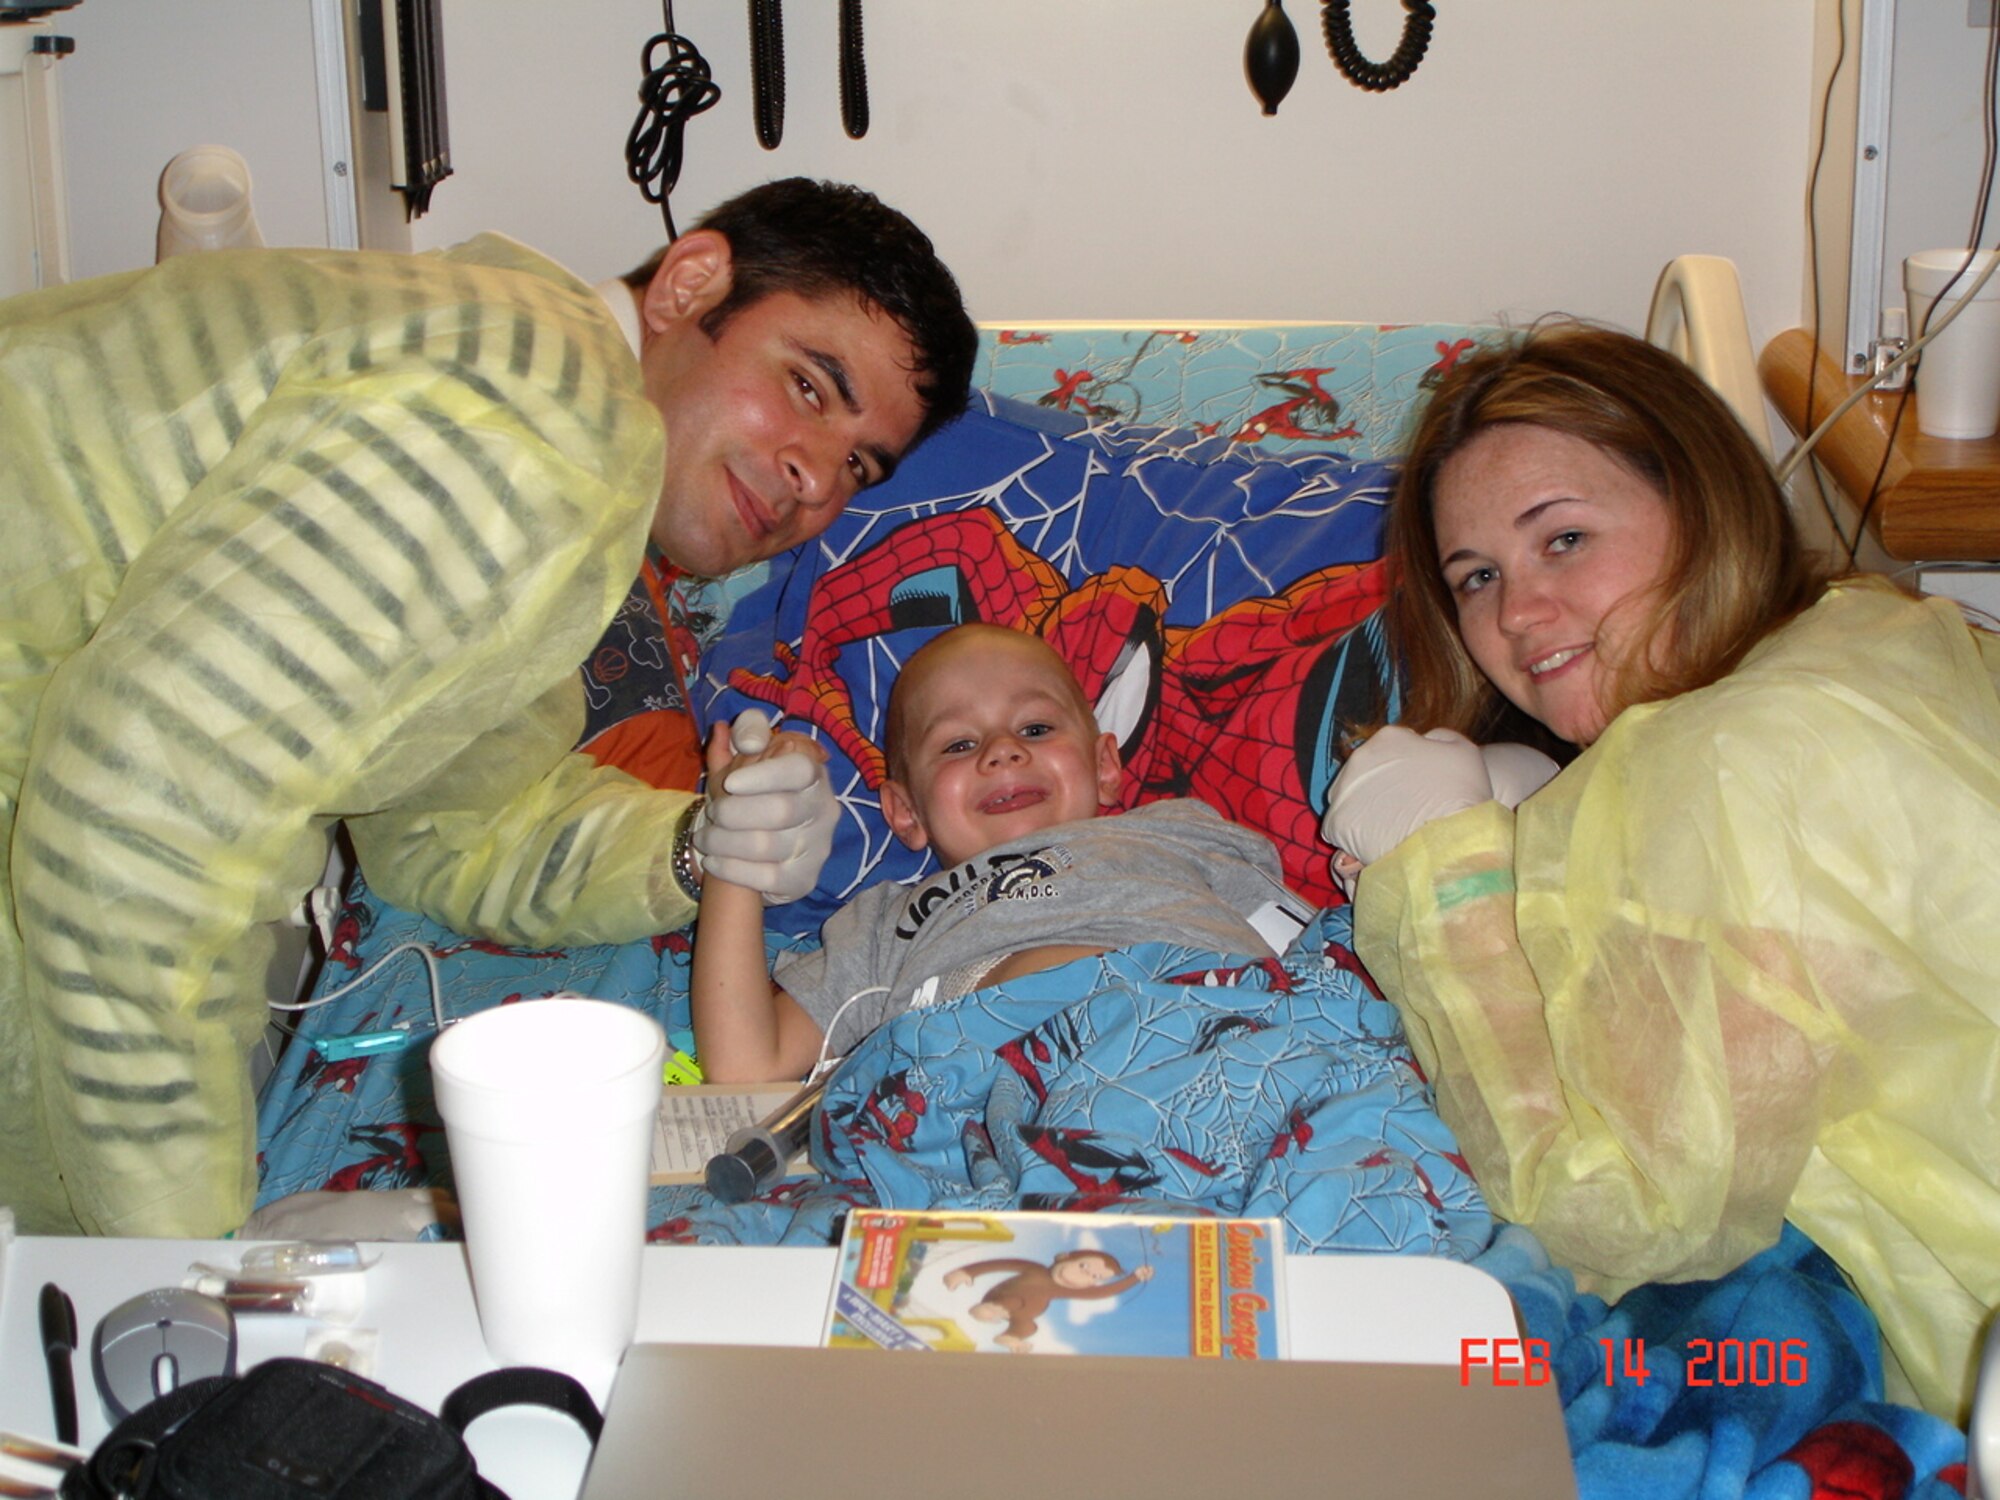 Tech. Sgt. Billy Gazzaway, assigned to the 21st Communications Squadron at Peterson Air Force Base, and wife Master Sgt. Emily Gazzaway, the Air Force Academy's senior enlisted aide, take a photograph with their son, John Kadin Gazzaway, in February 2006. Kadin died of leukemia May 2, 2006. The Gazzaways said Air Force mental health services helped them recover from their loss and encourage Airmen to take advantage of the support services available to them when they need help. (Courtesy photo)